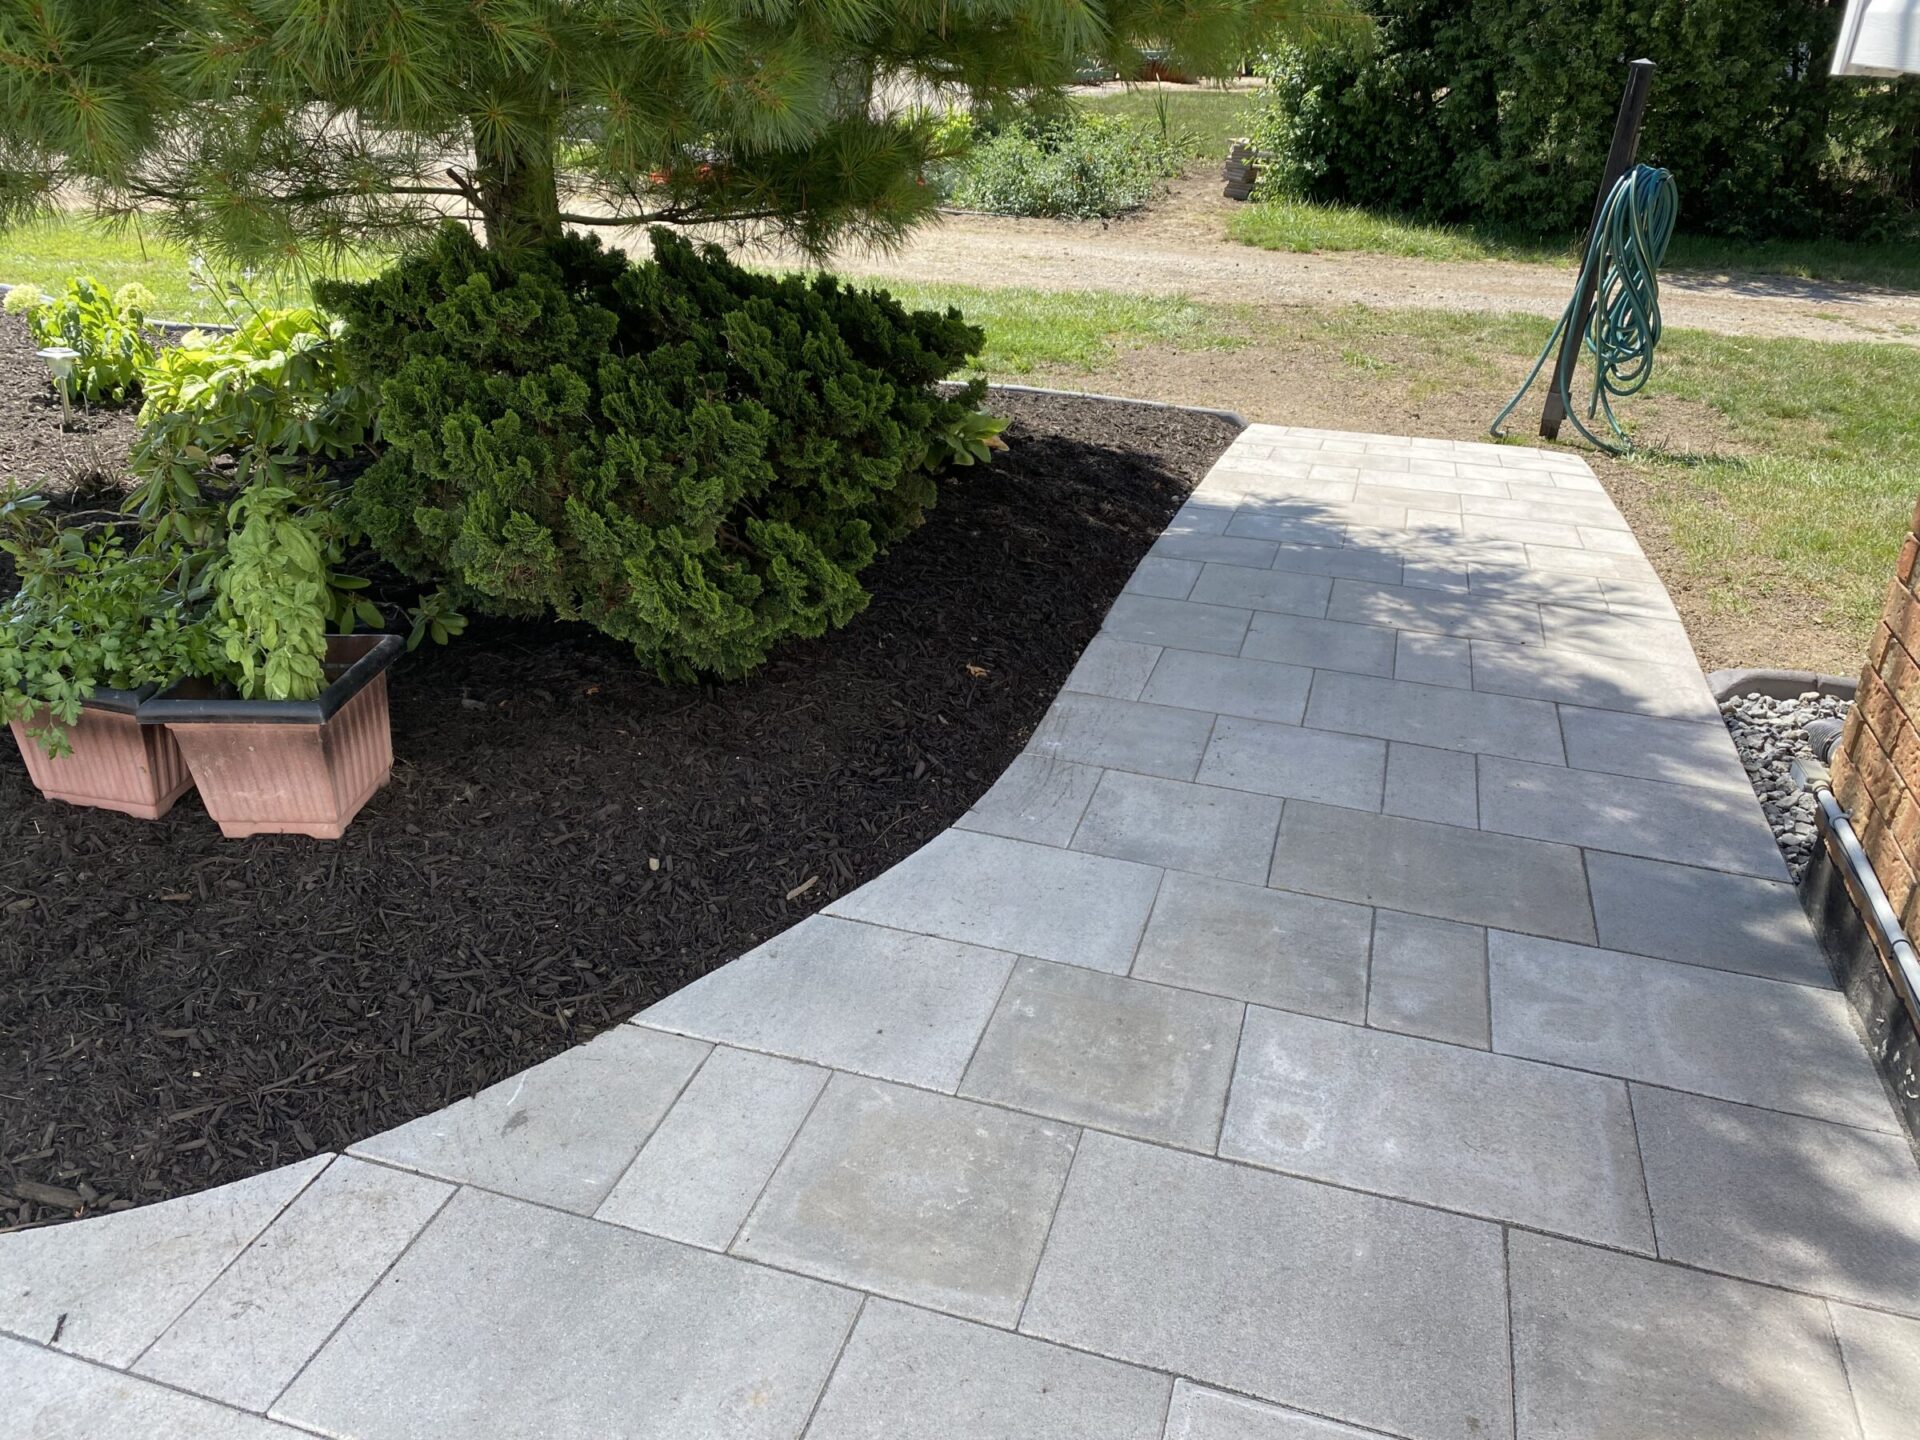 This image shows a neat garden path with large square and rectangular pavers, edged by mulch, shrubs, and a potted basil plant under a tree.